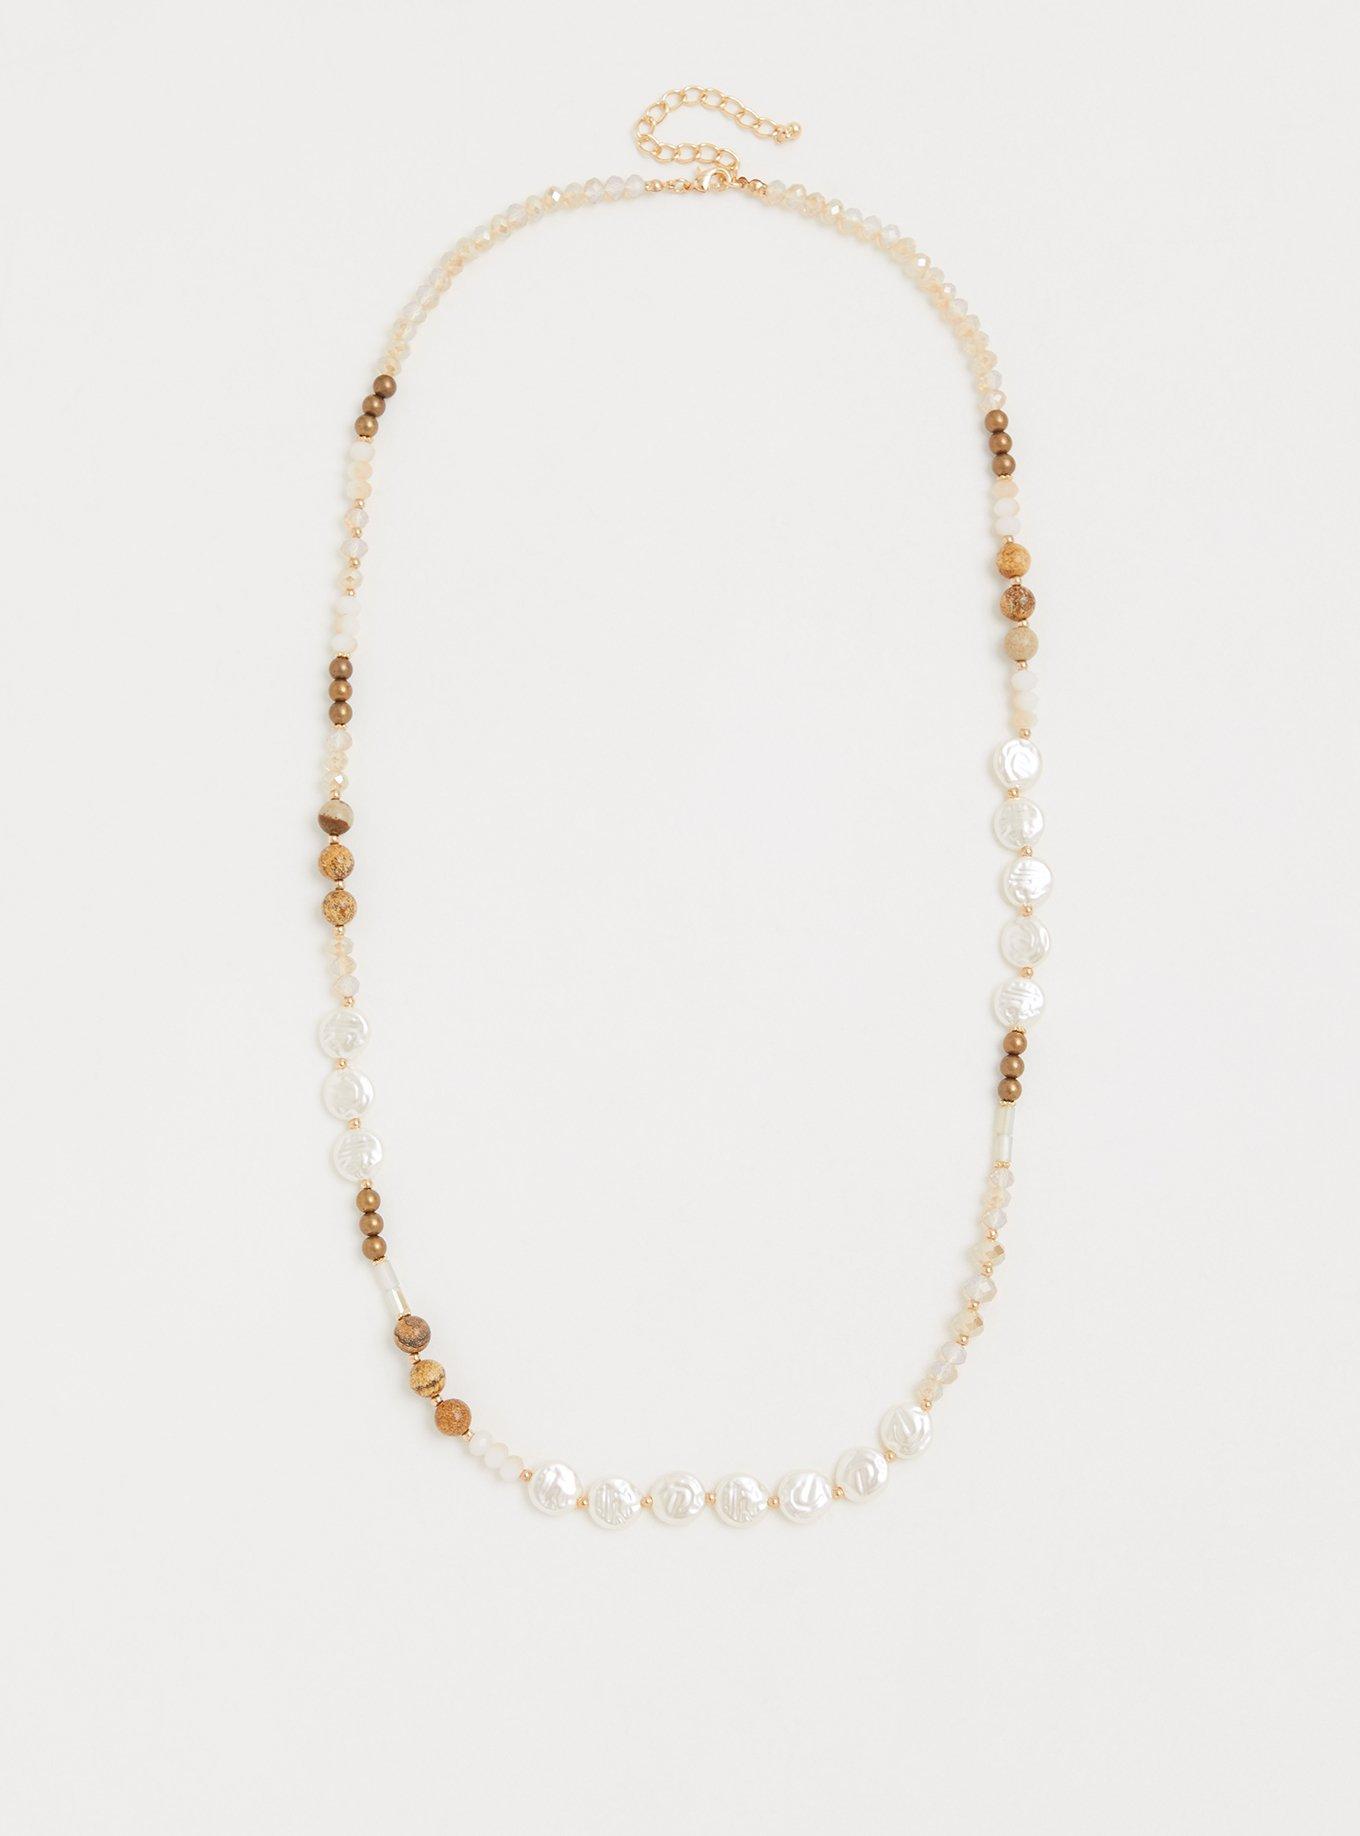 Plus Size - Pearl and Stone Necklace - Torrid